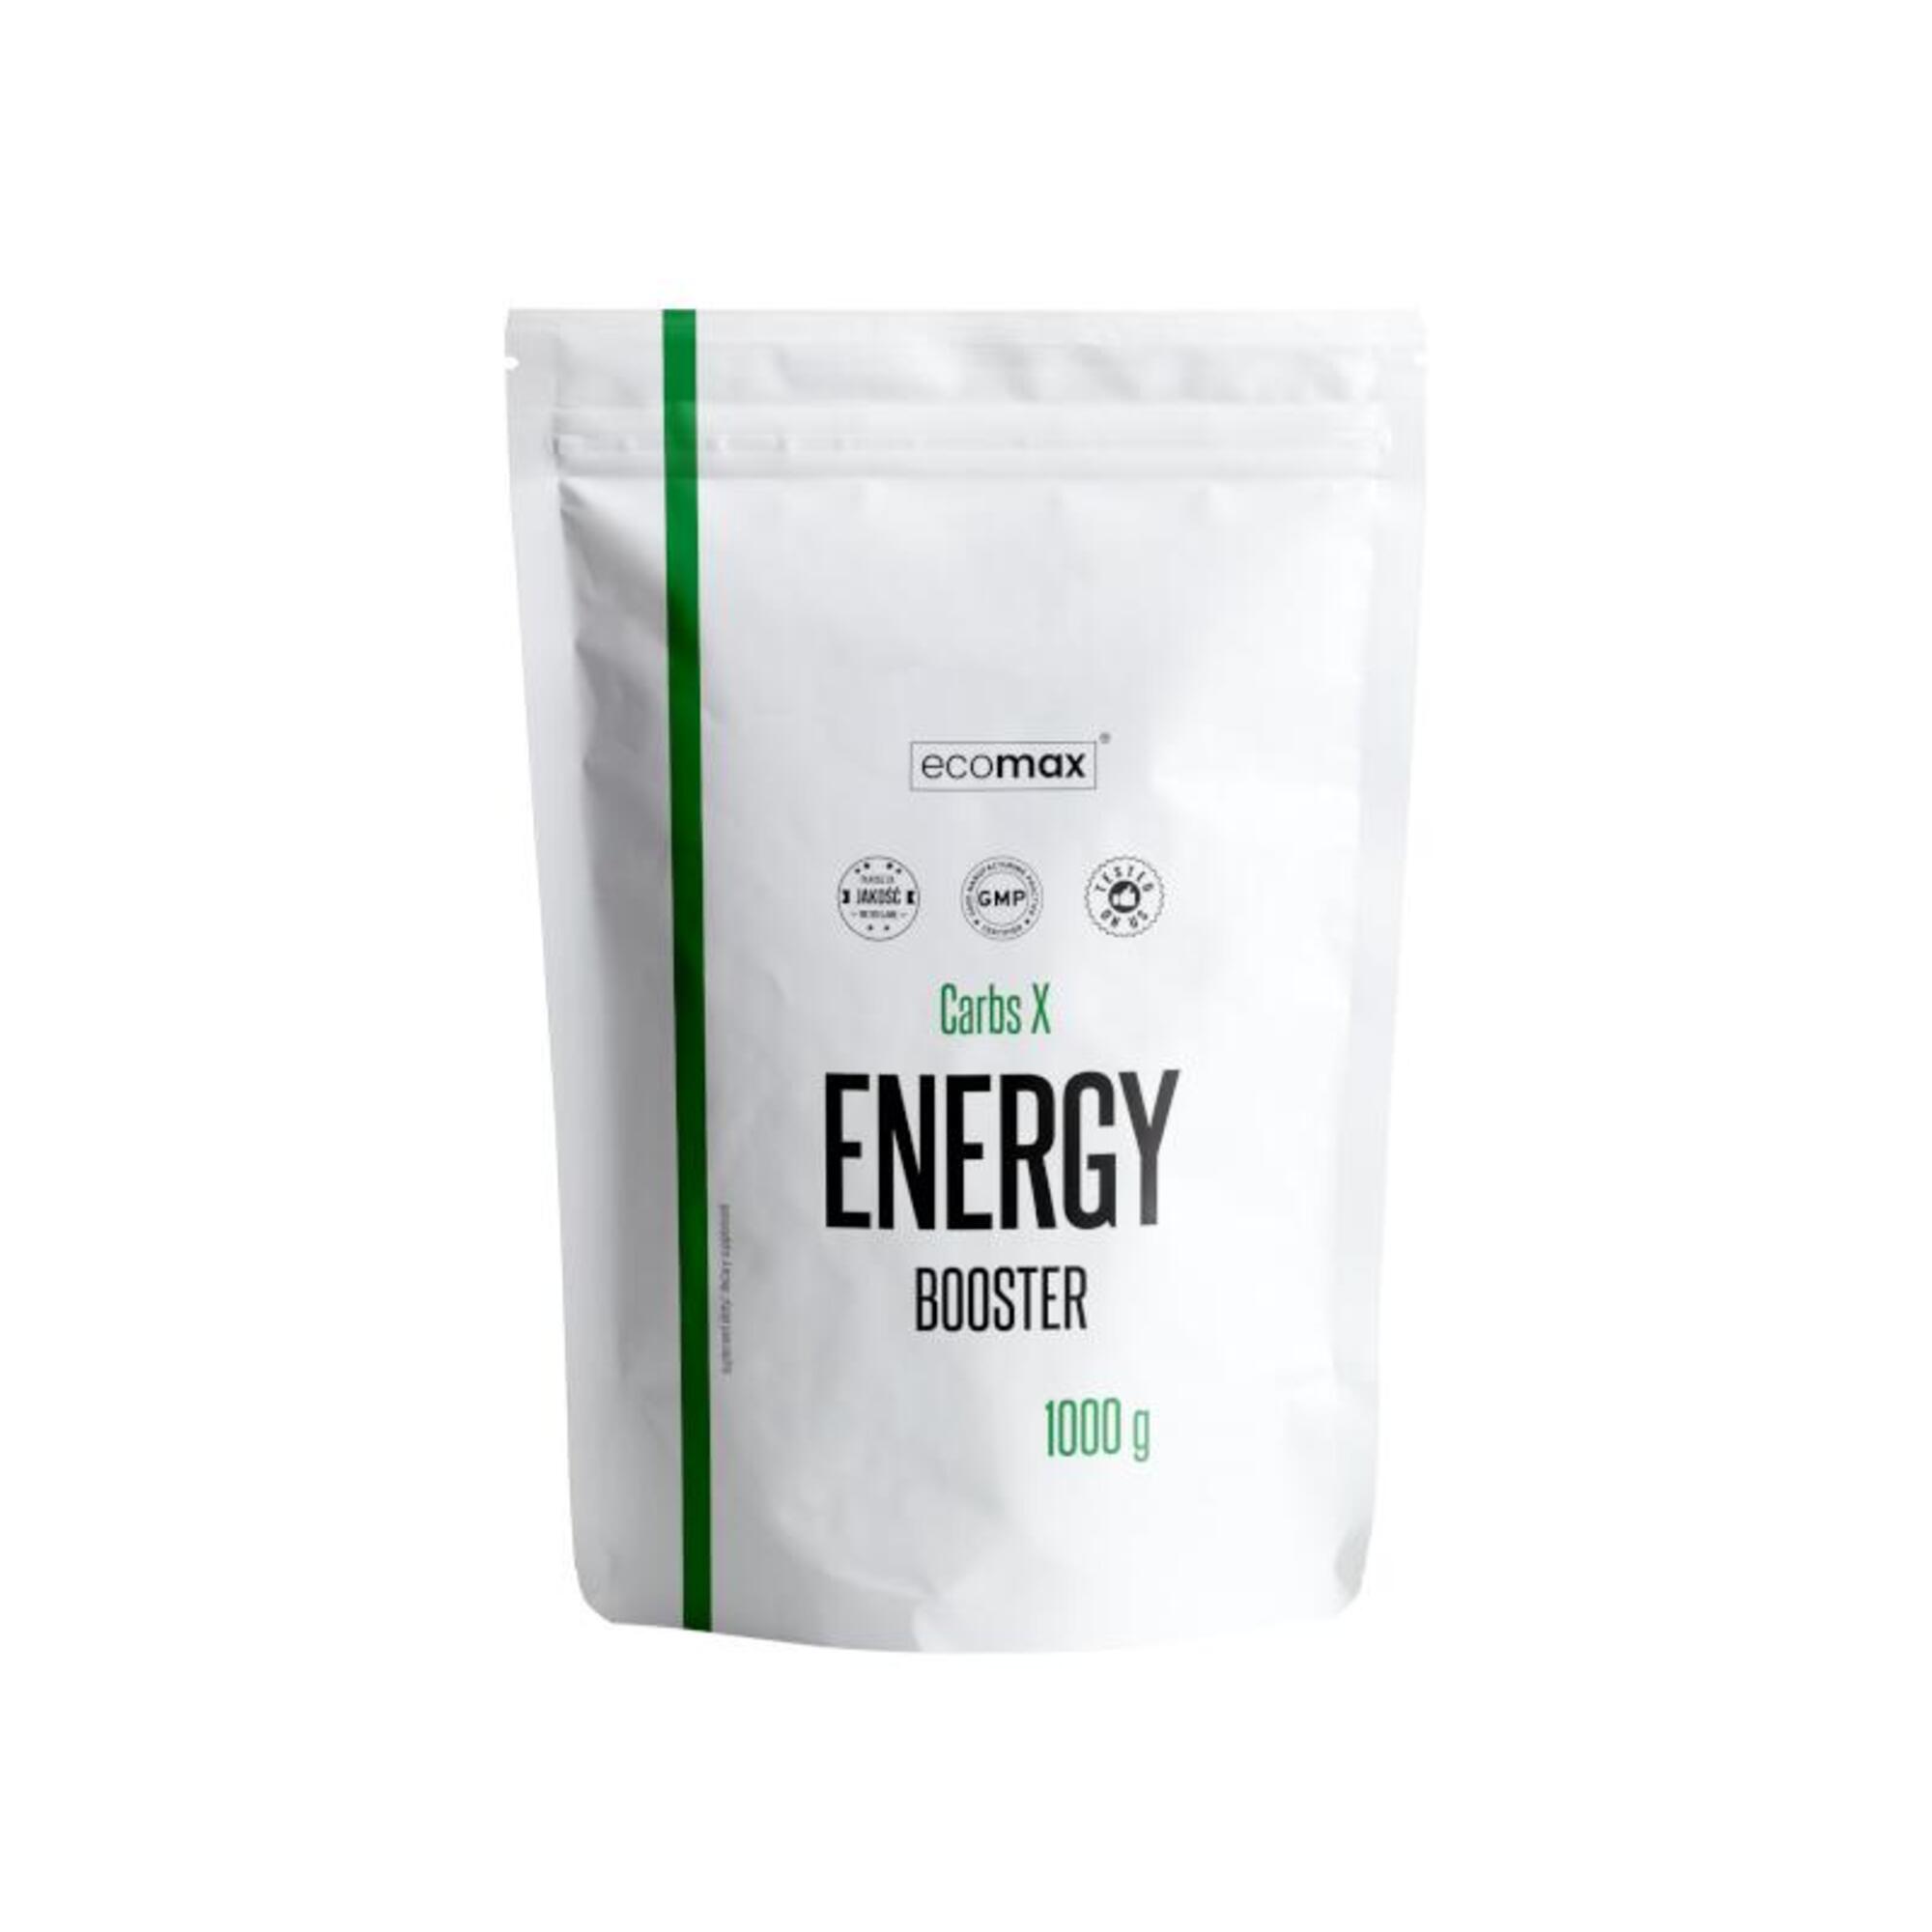 ECOMAX Carbs X Energy Booster 1000 g